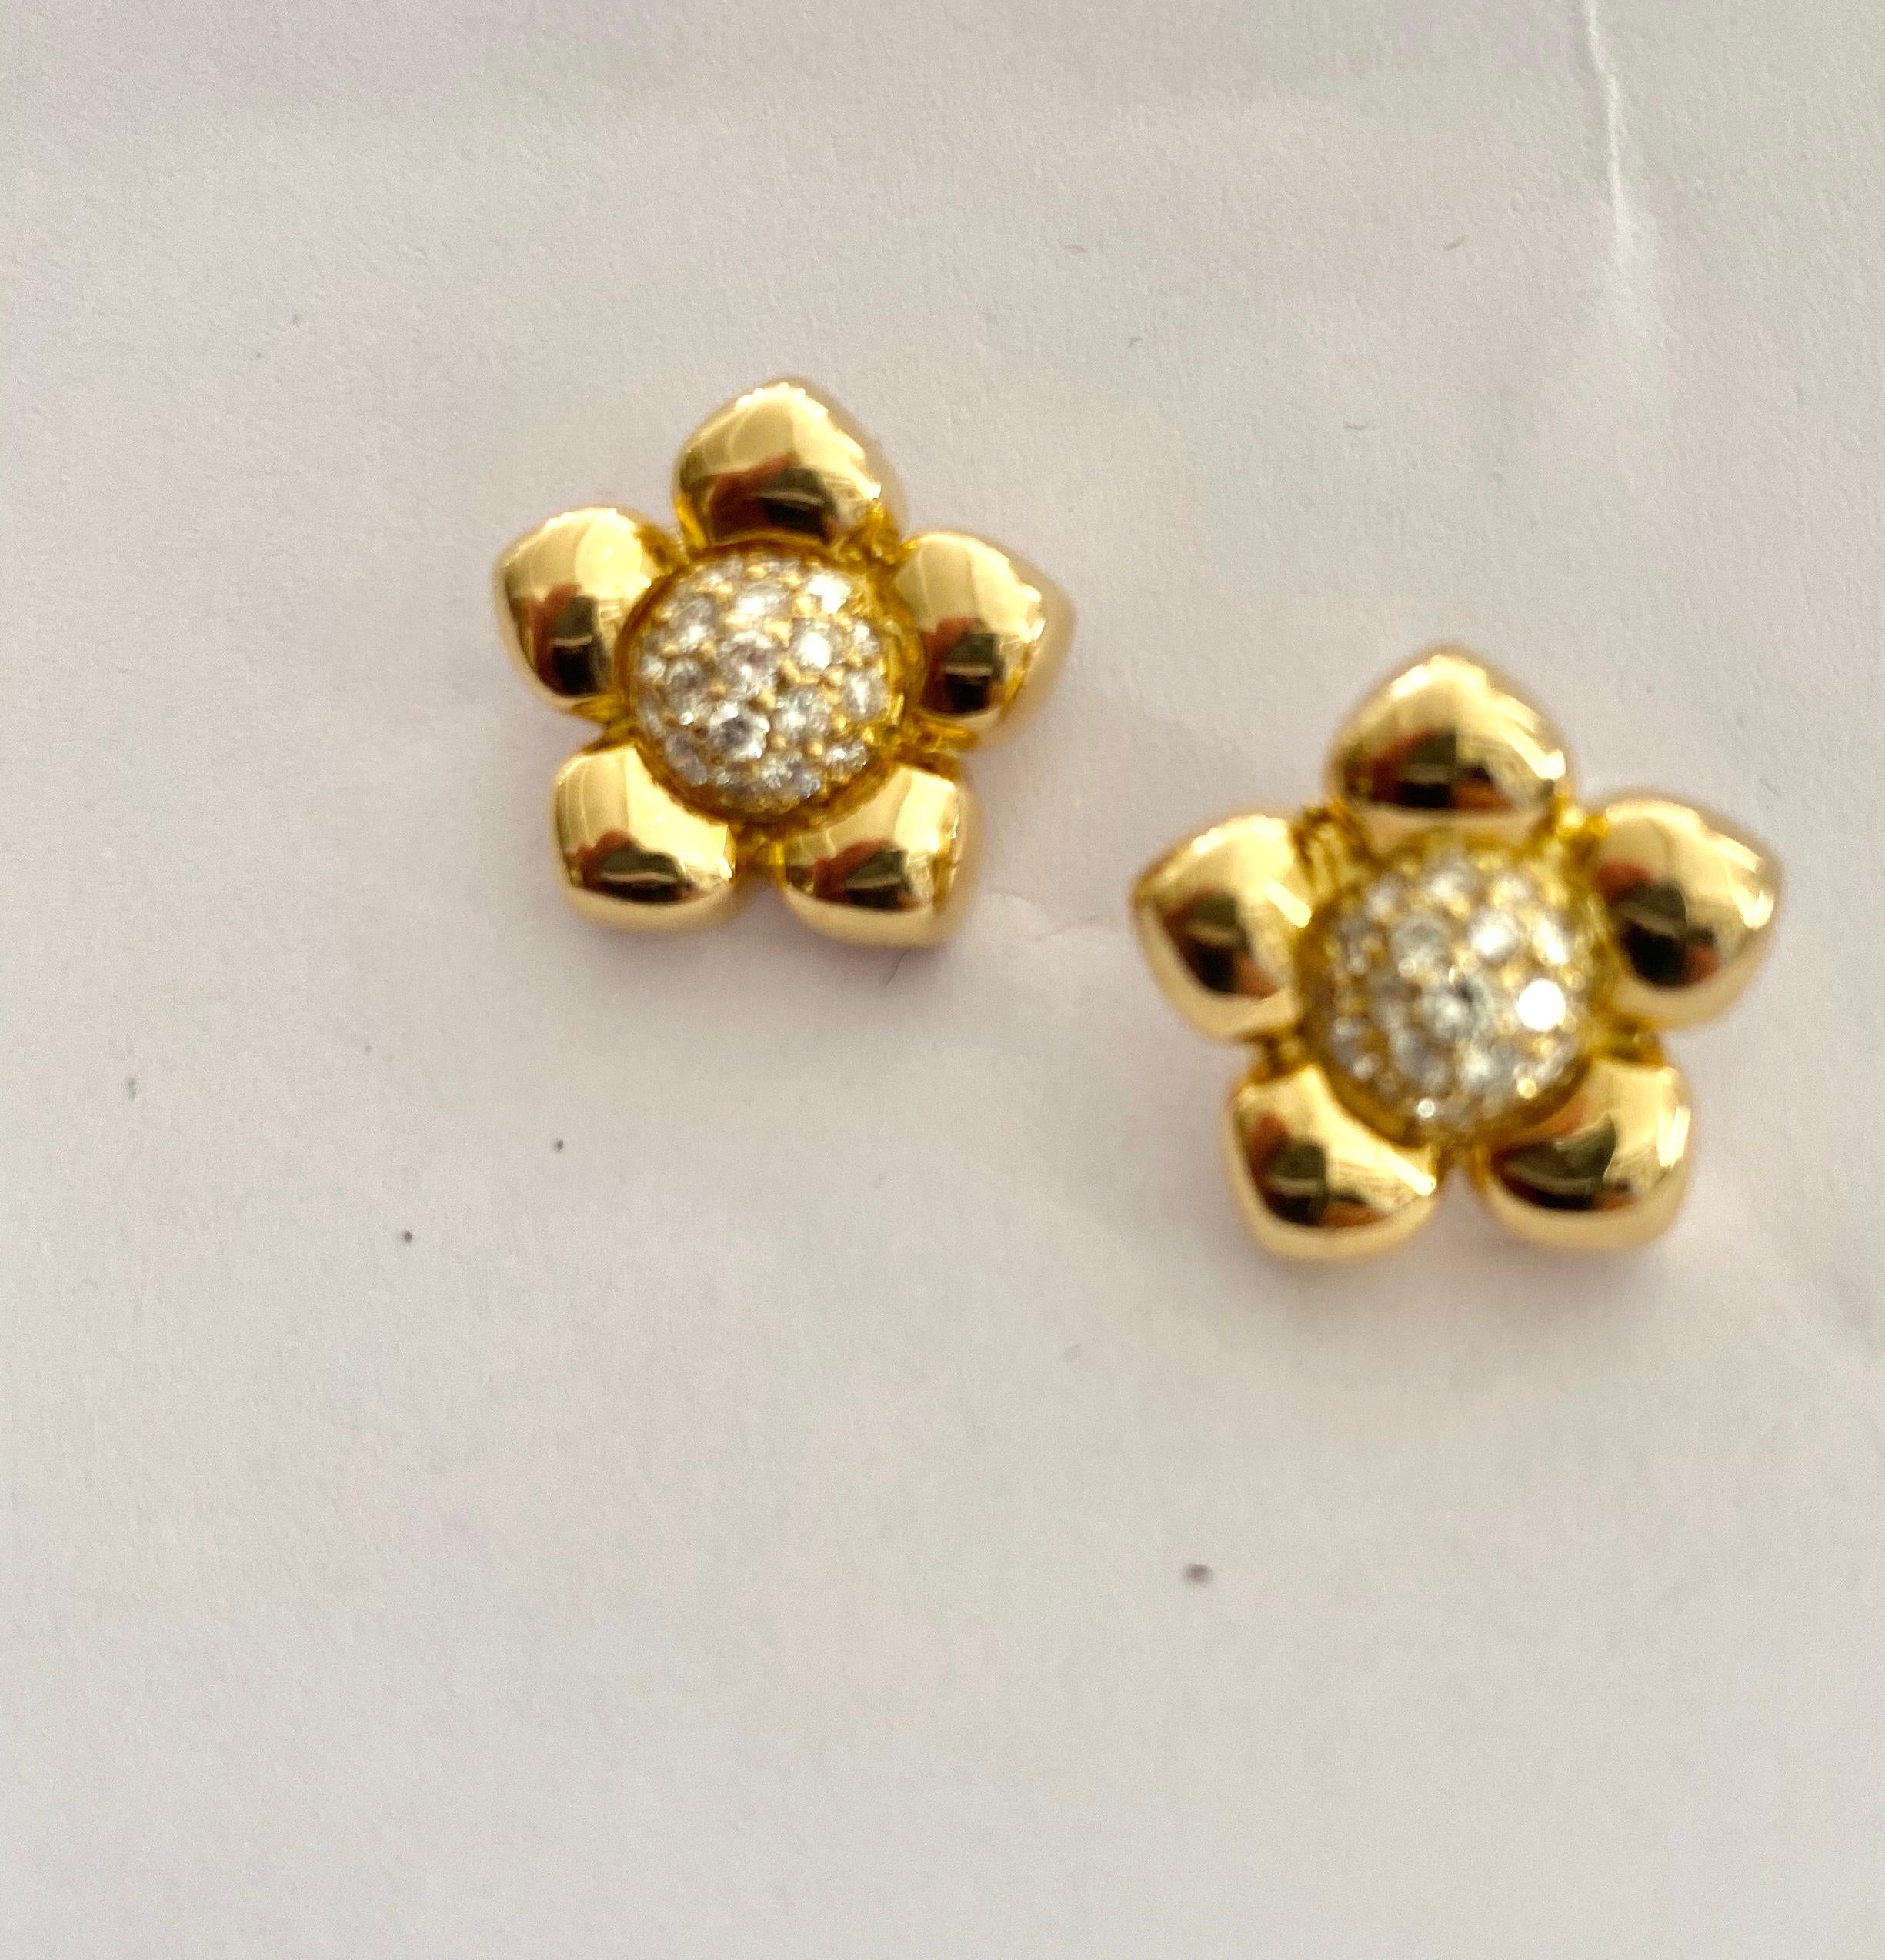 Brilliant Cut One '1' 18 Karat Yellow Gold Pair of Earrings, Set with 38 Diamonds, France 1970